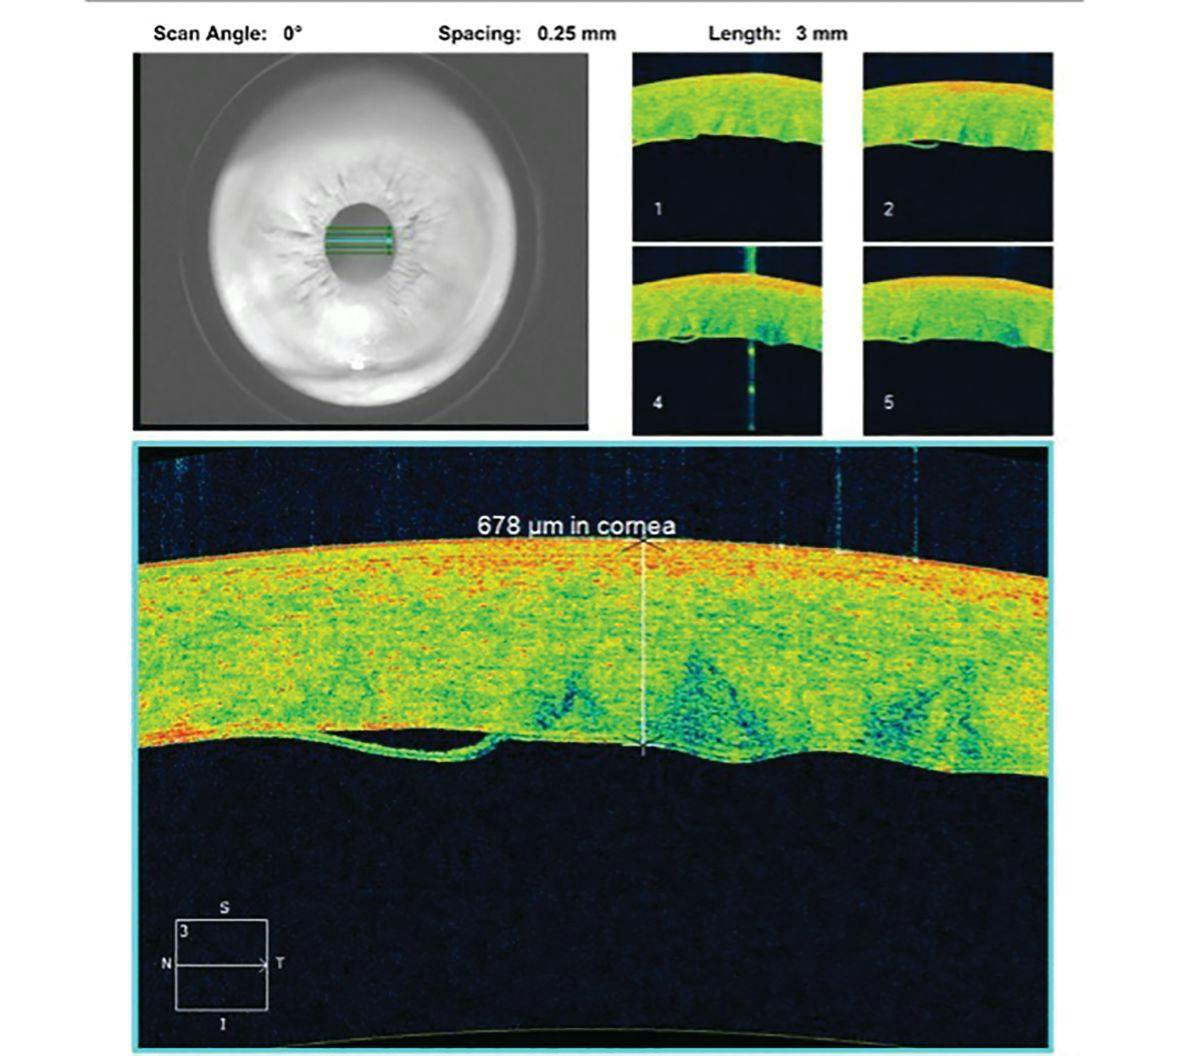 Comanaging tears in Descemet membrane during cataract surgery